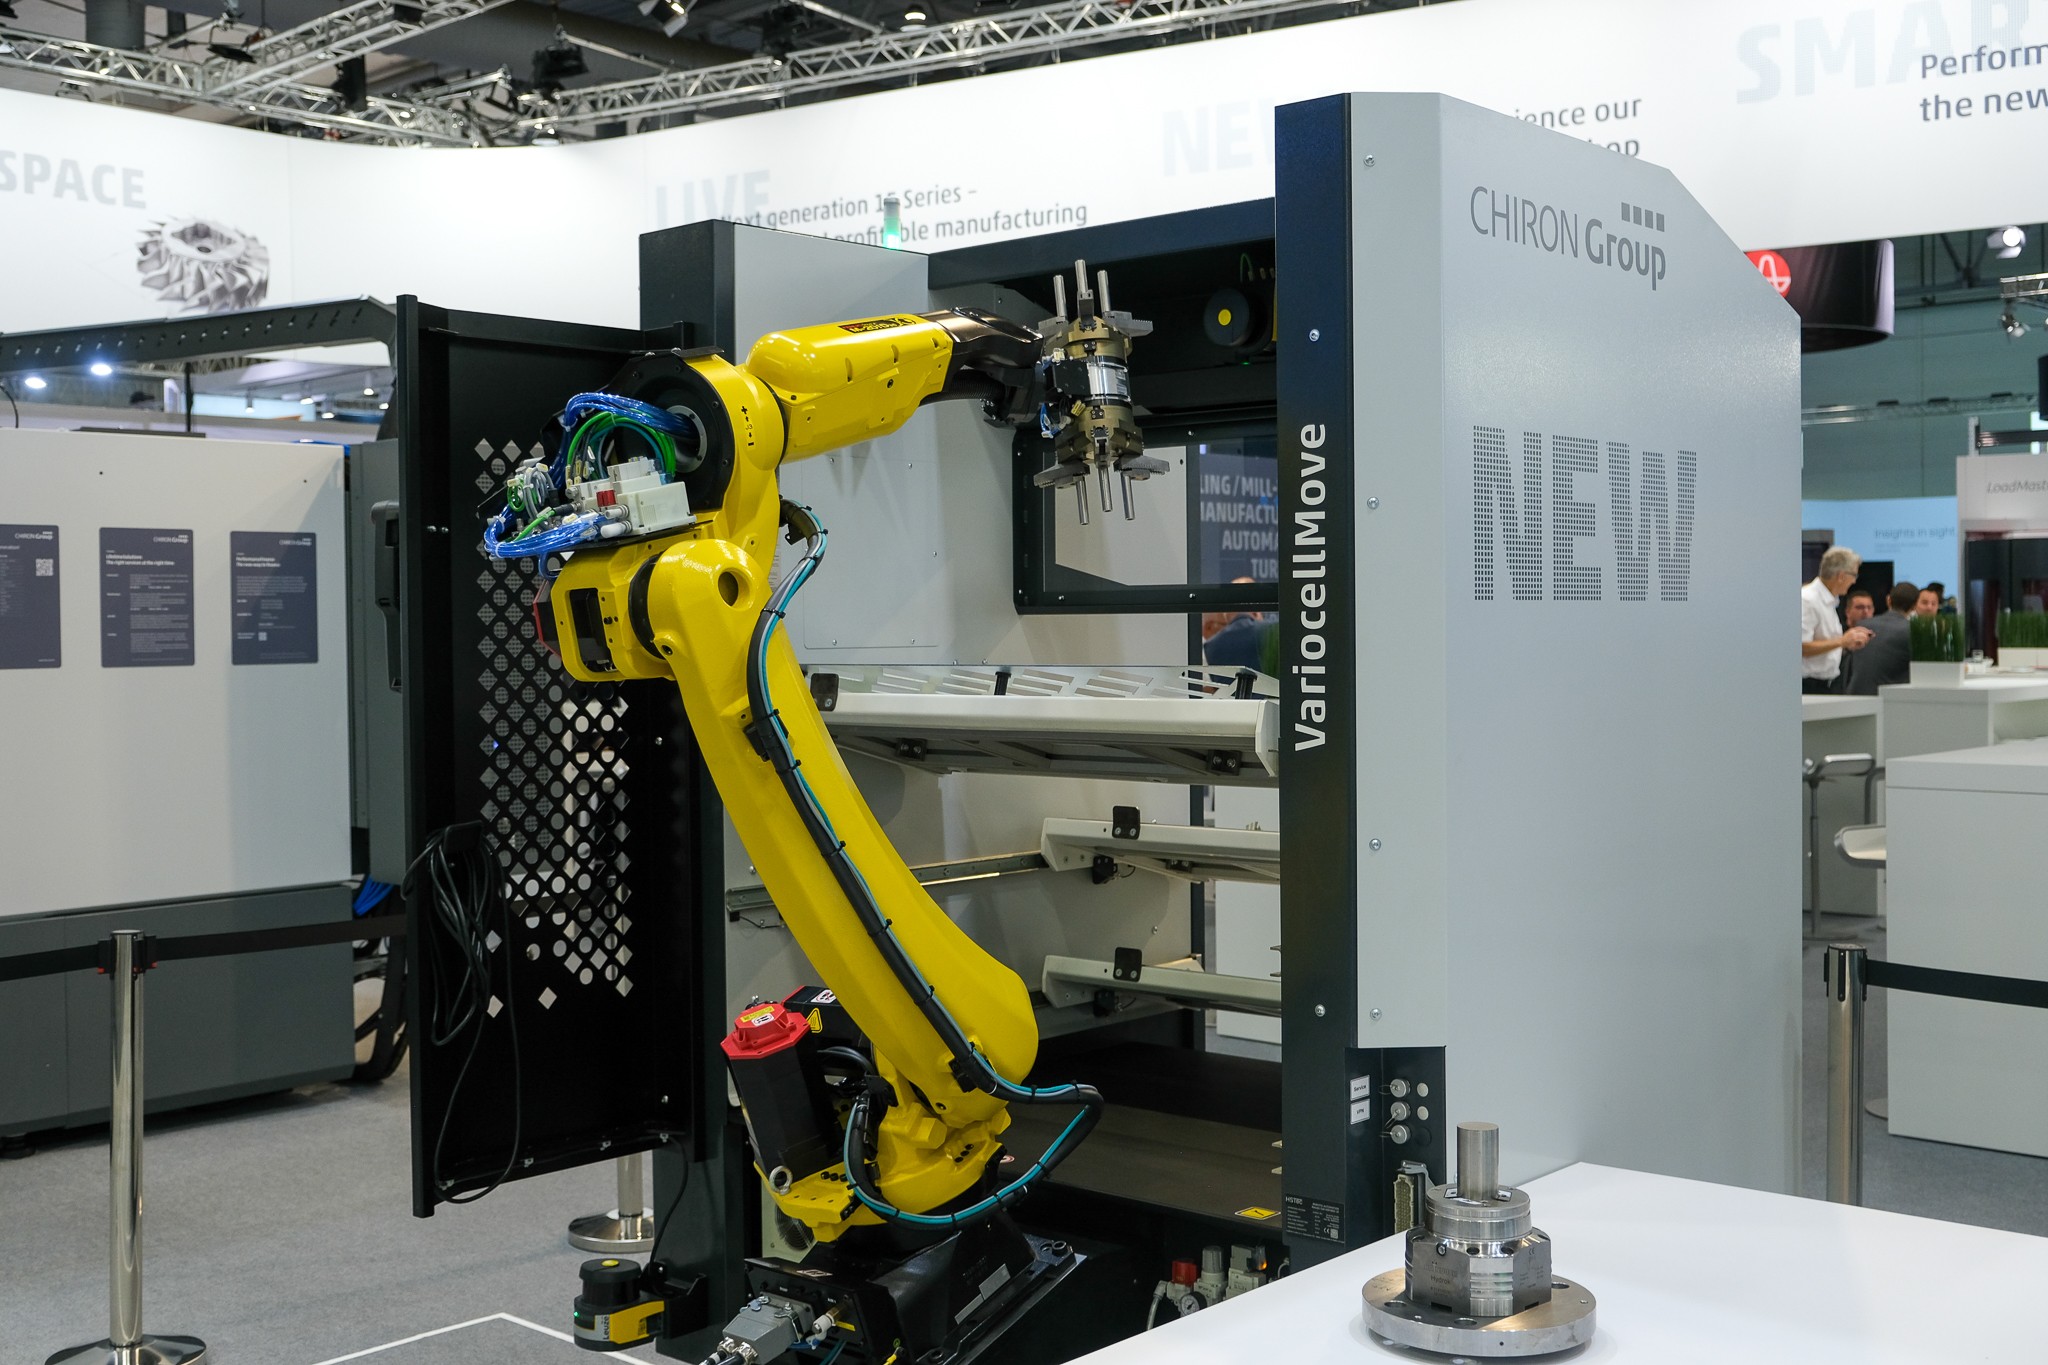 With the VariocellMove, the CHIRON Group added a new automation solution to its portfolio that can be flexibly combined with changing machining centers of the company.